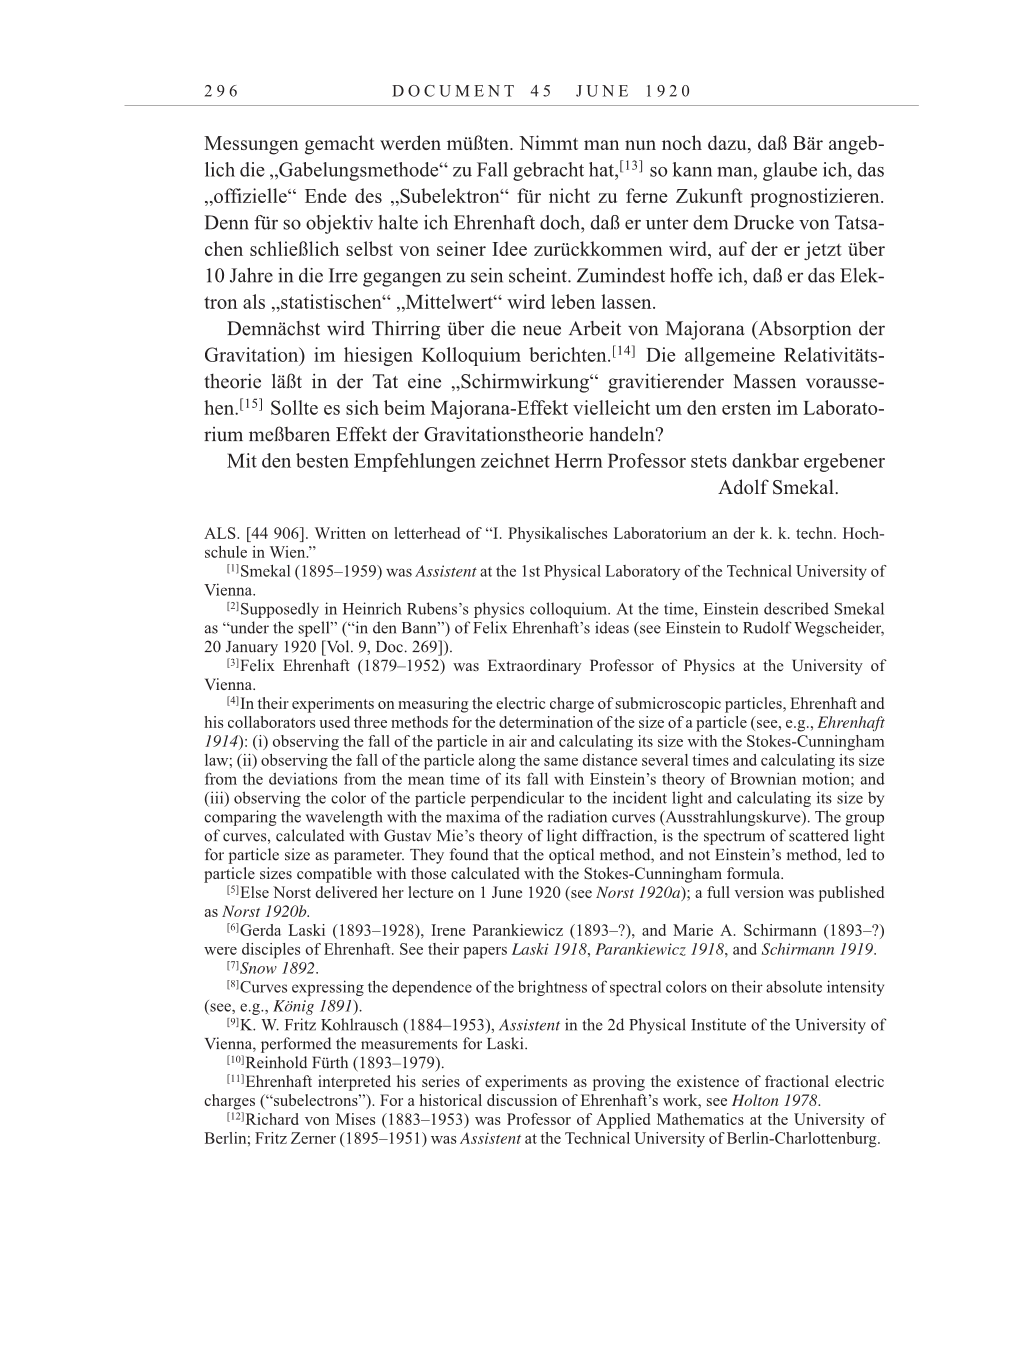 Volume 10: The Berlin Years: Correspondence May-December 1920 / Supplementary Correspondence 1909-1920 page 296